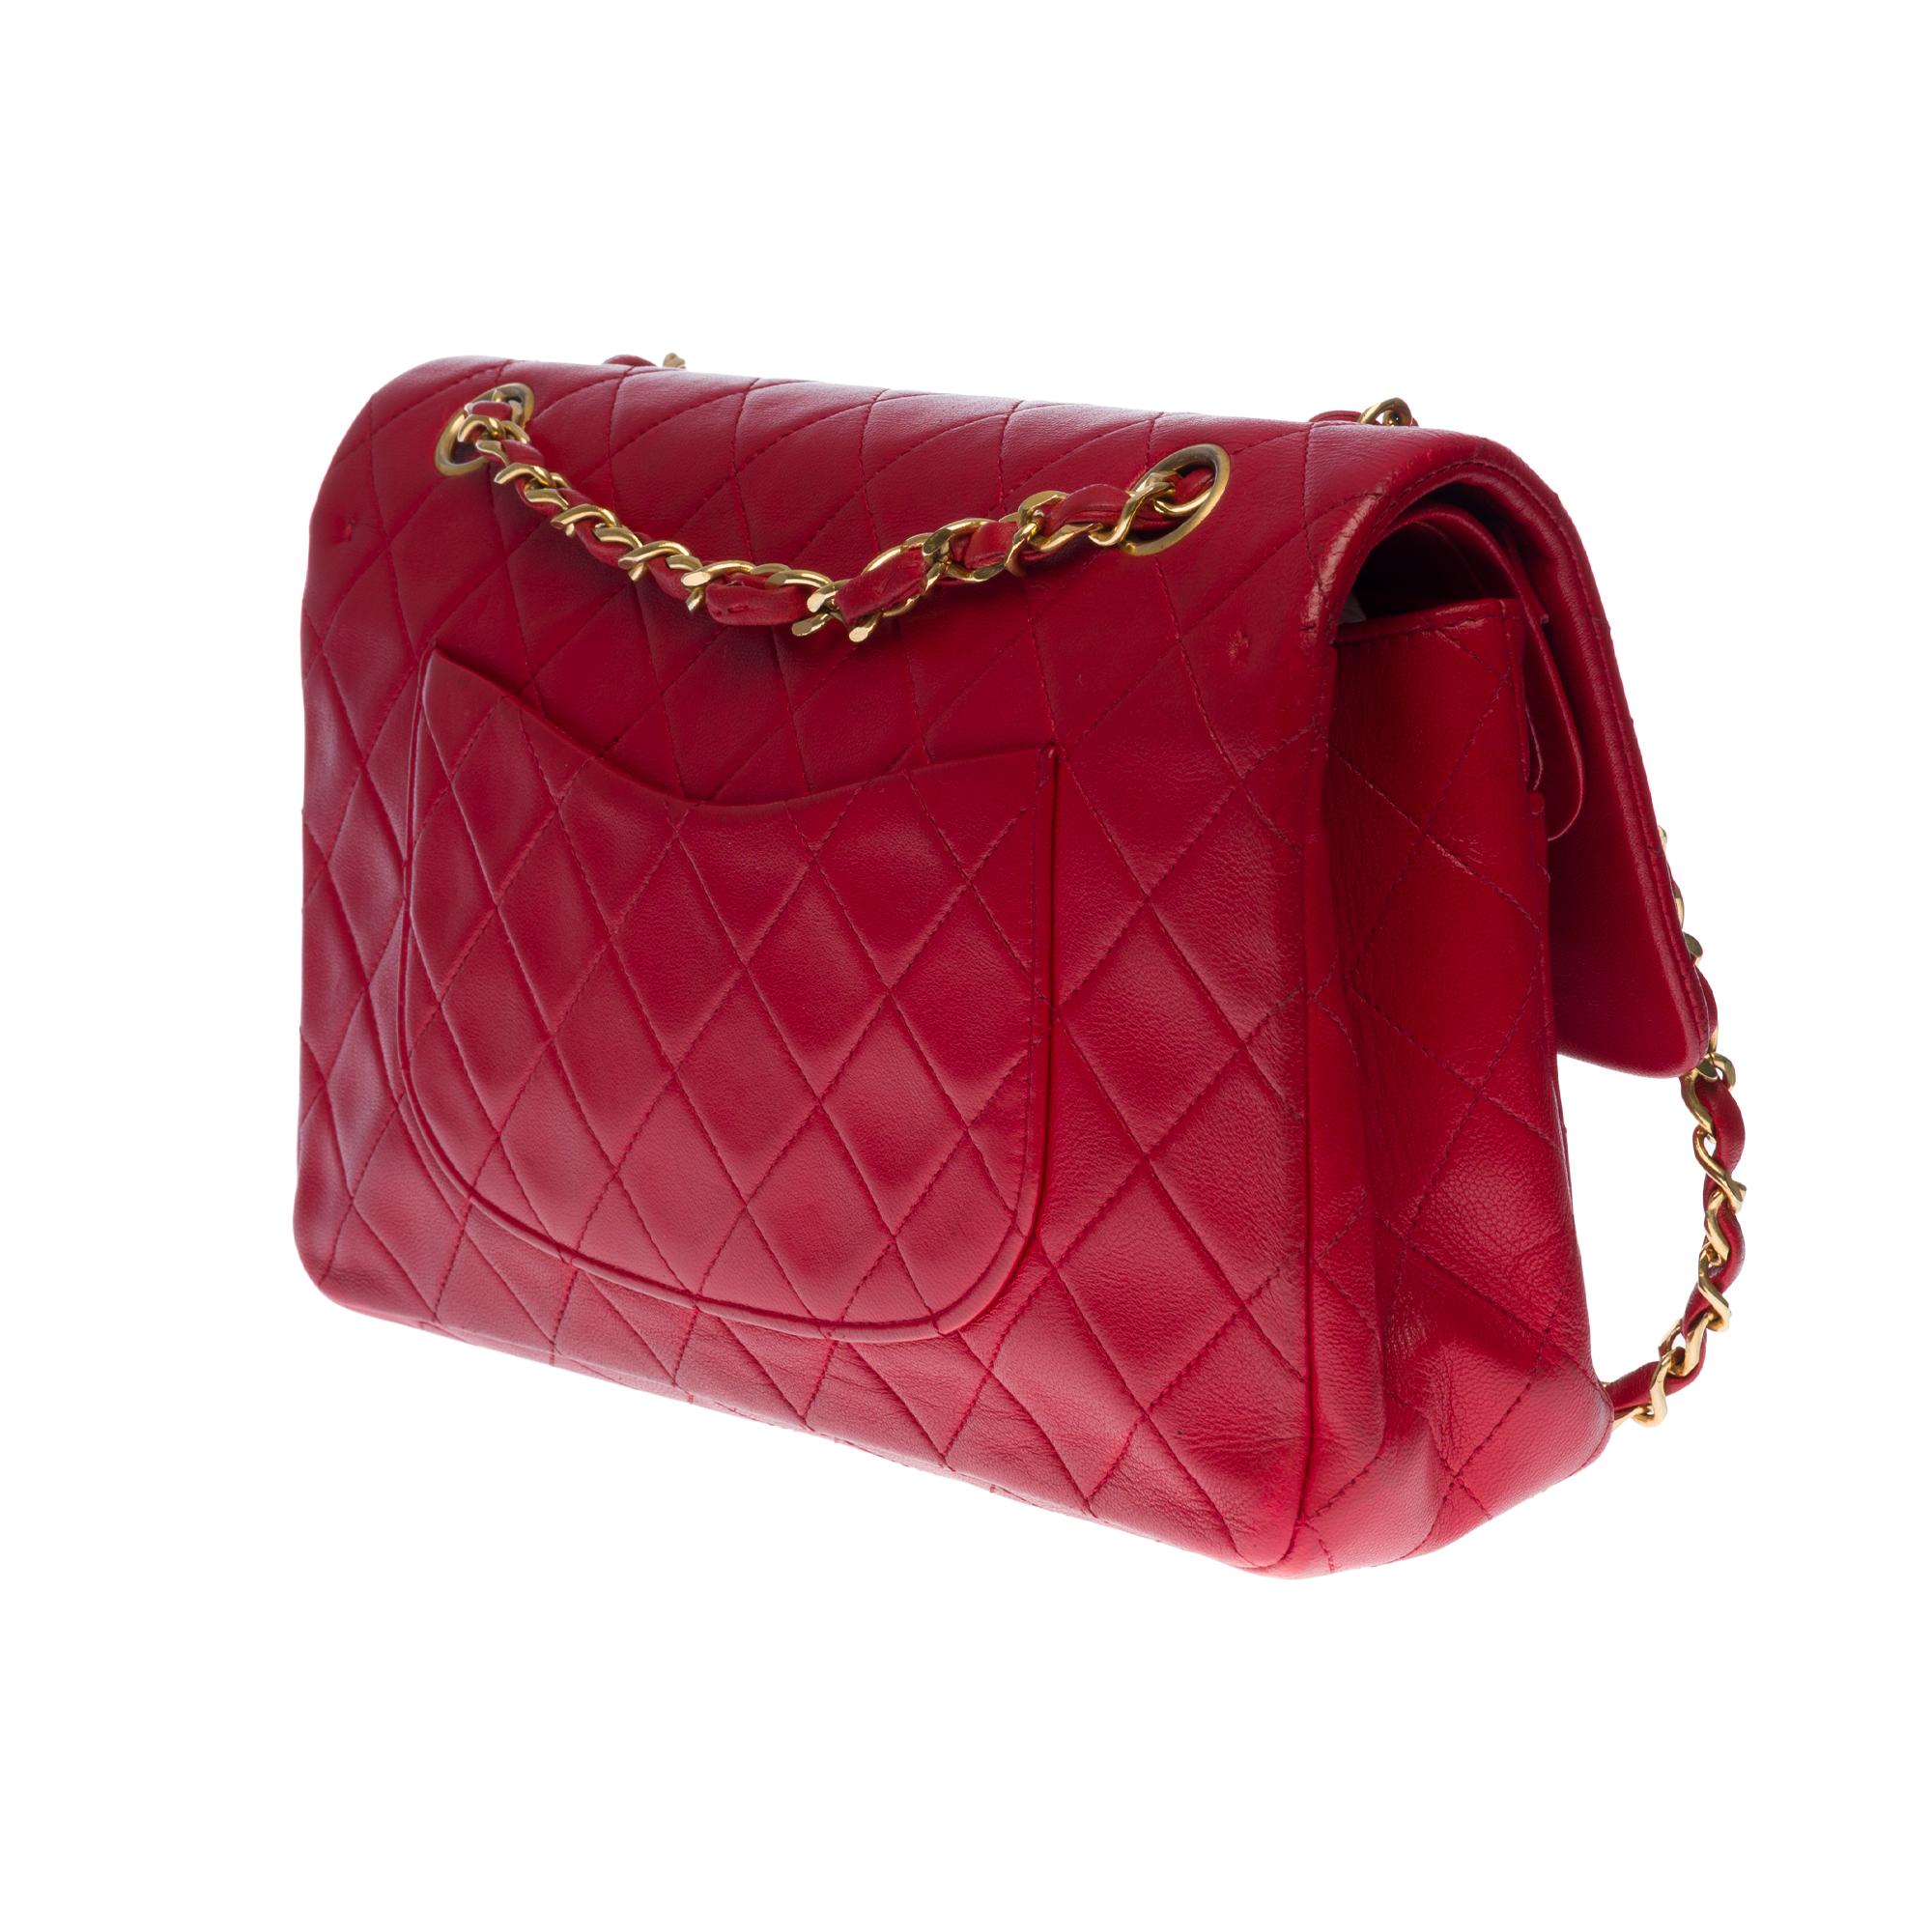 Women's Chanel Timeless Medium double flap Shoulder bag in Red quilted leather, GHW